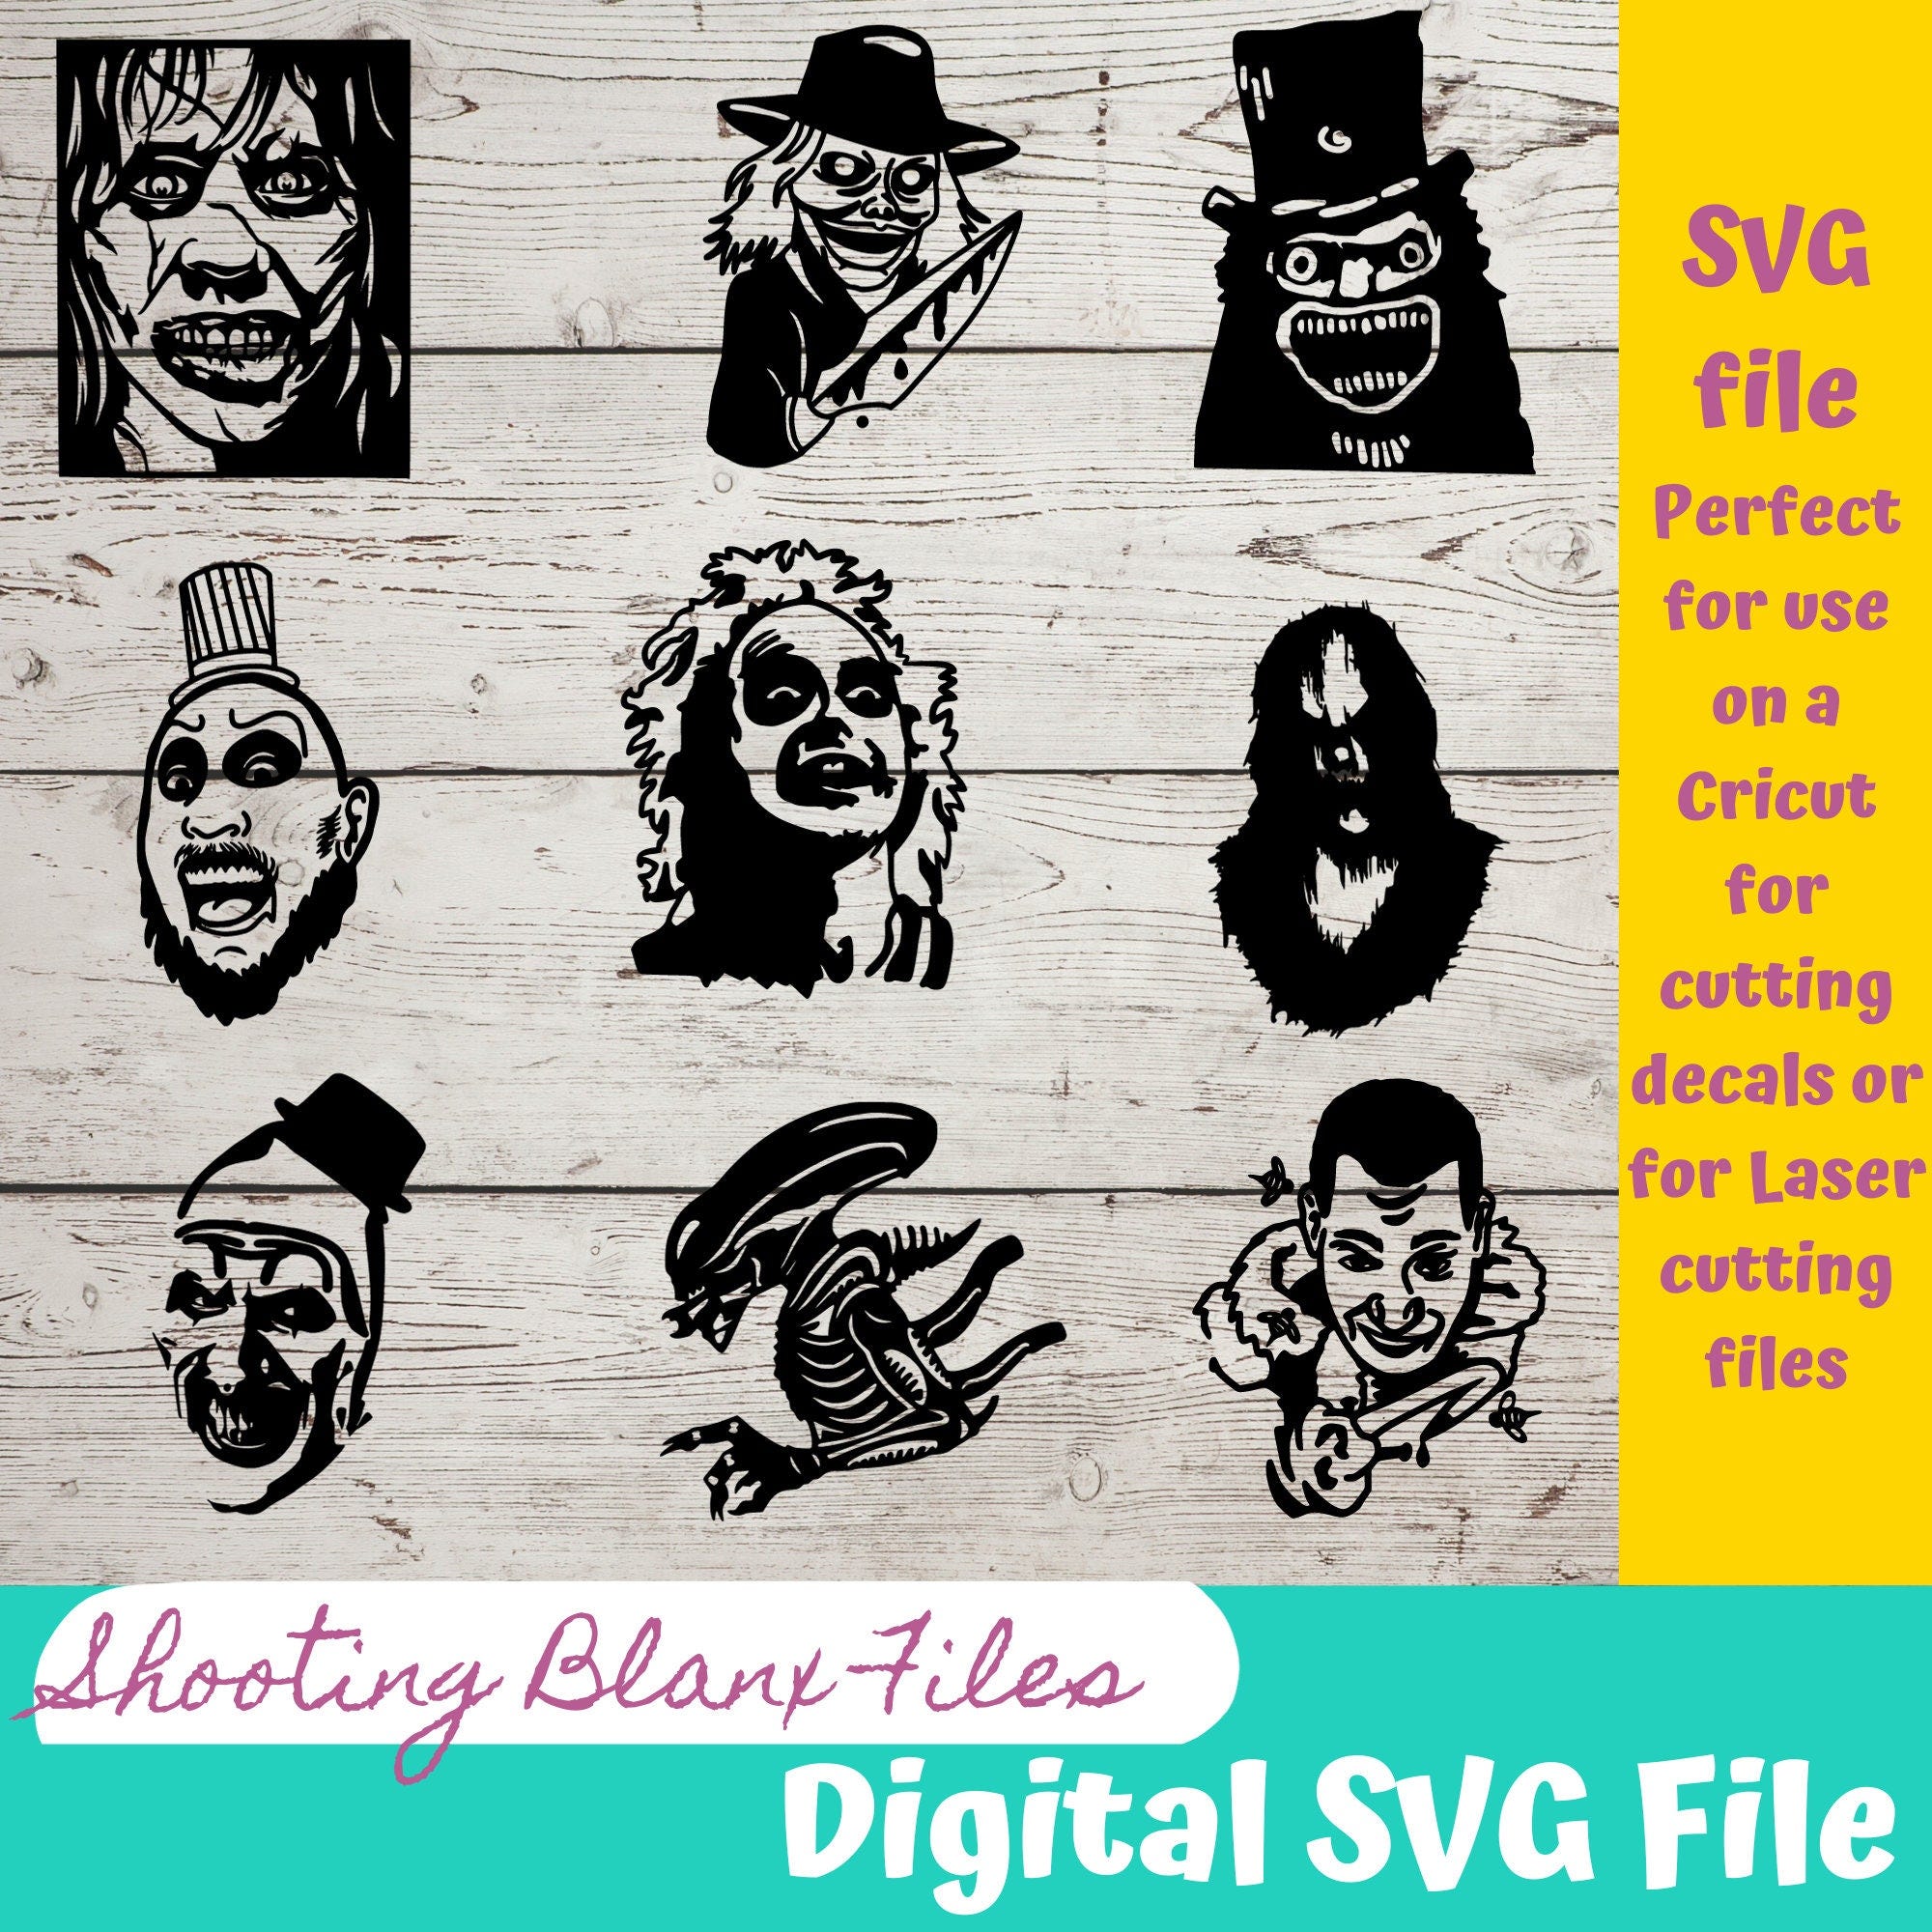 Horror SVG files perfect for Cricut & Modern Horror, also for laser cutting Glowforge, Halloween Files, scary, movie monsters